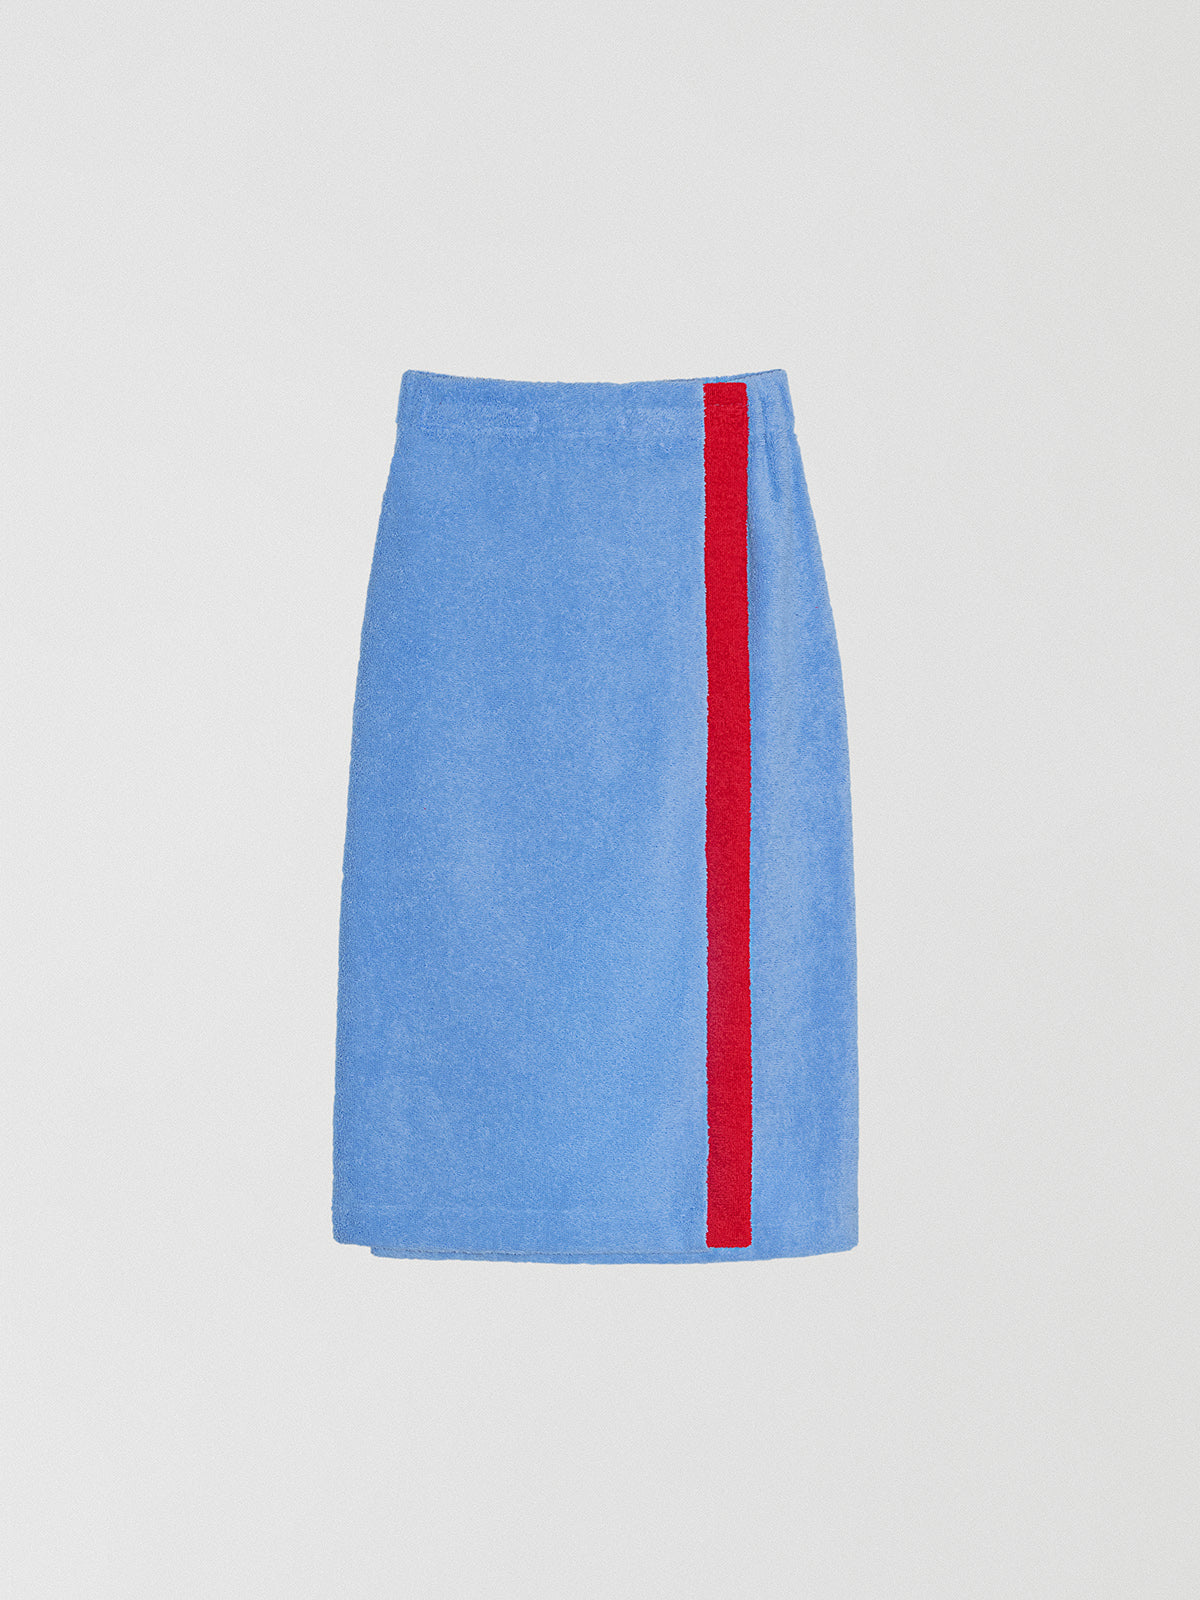 Pareo towel skirt made in blue cotton with red band.